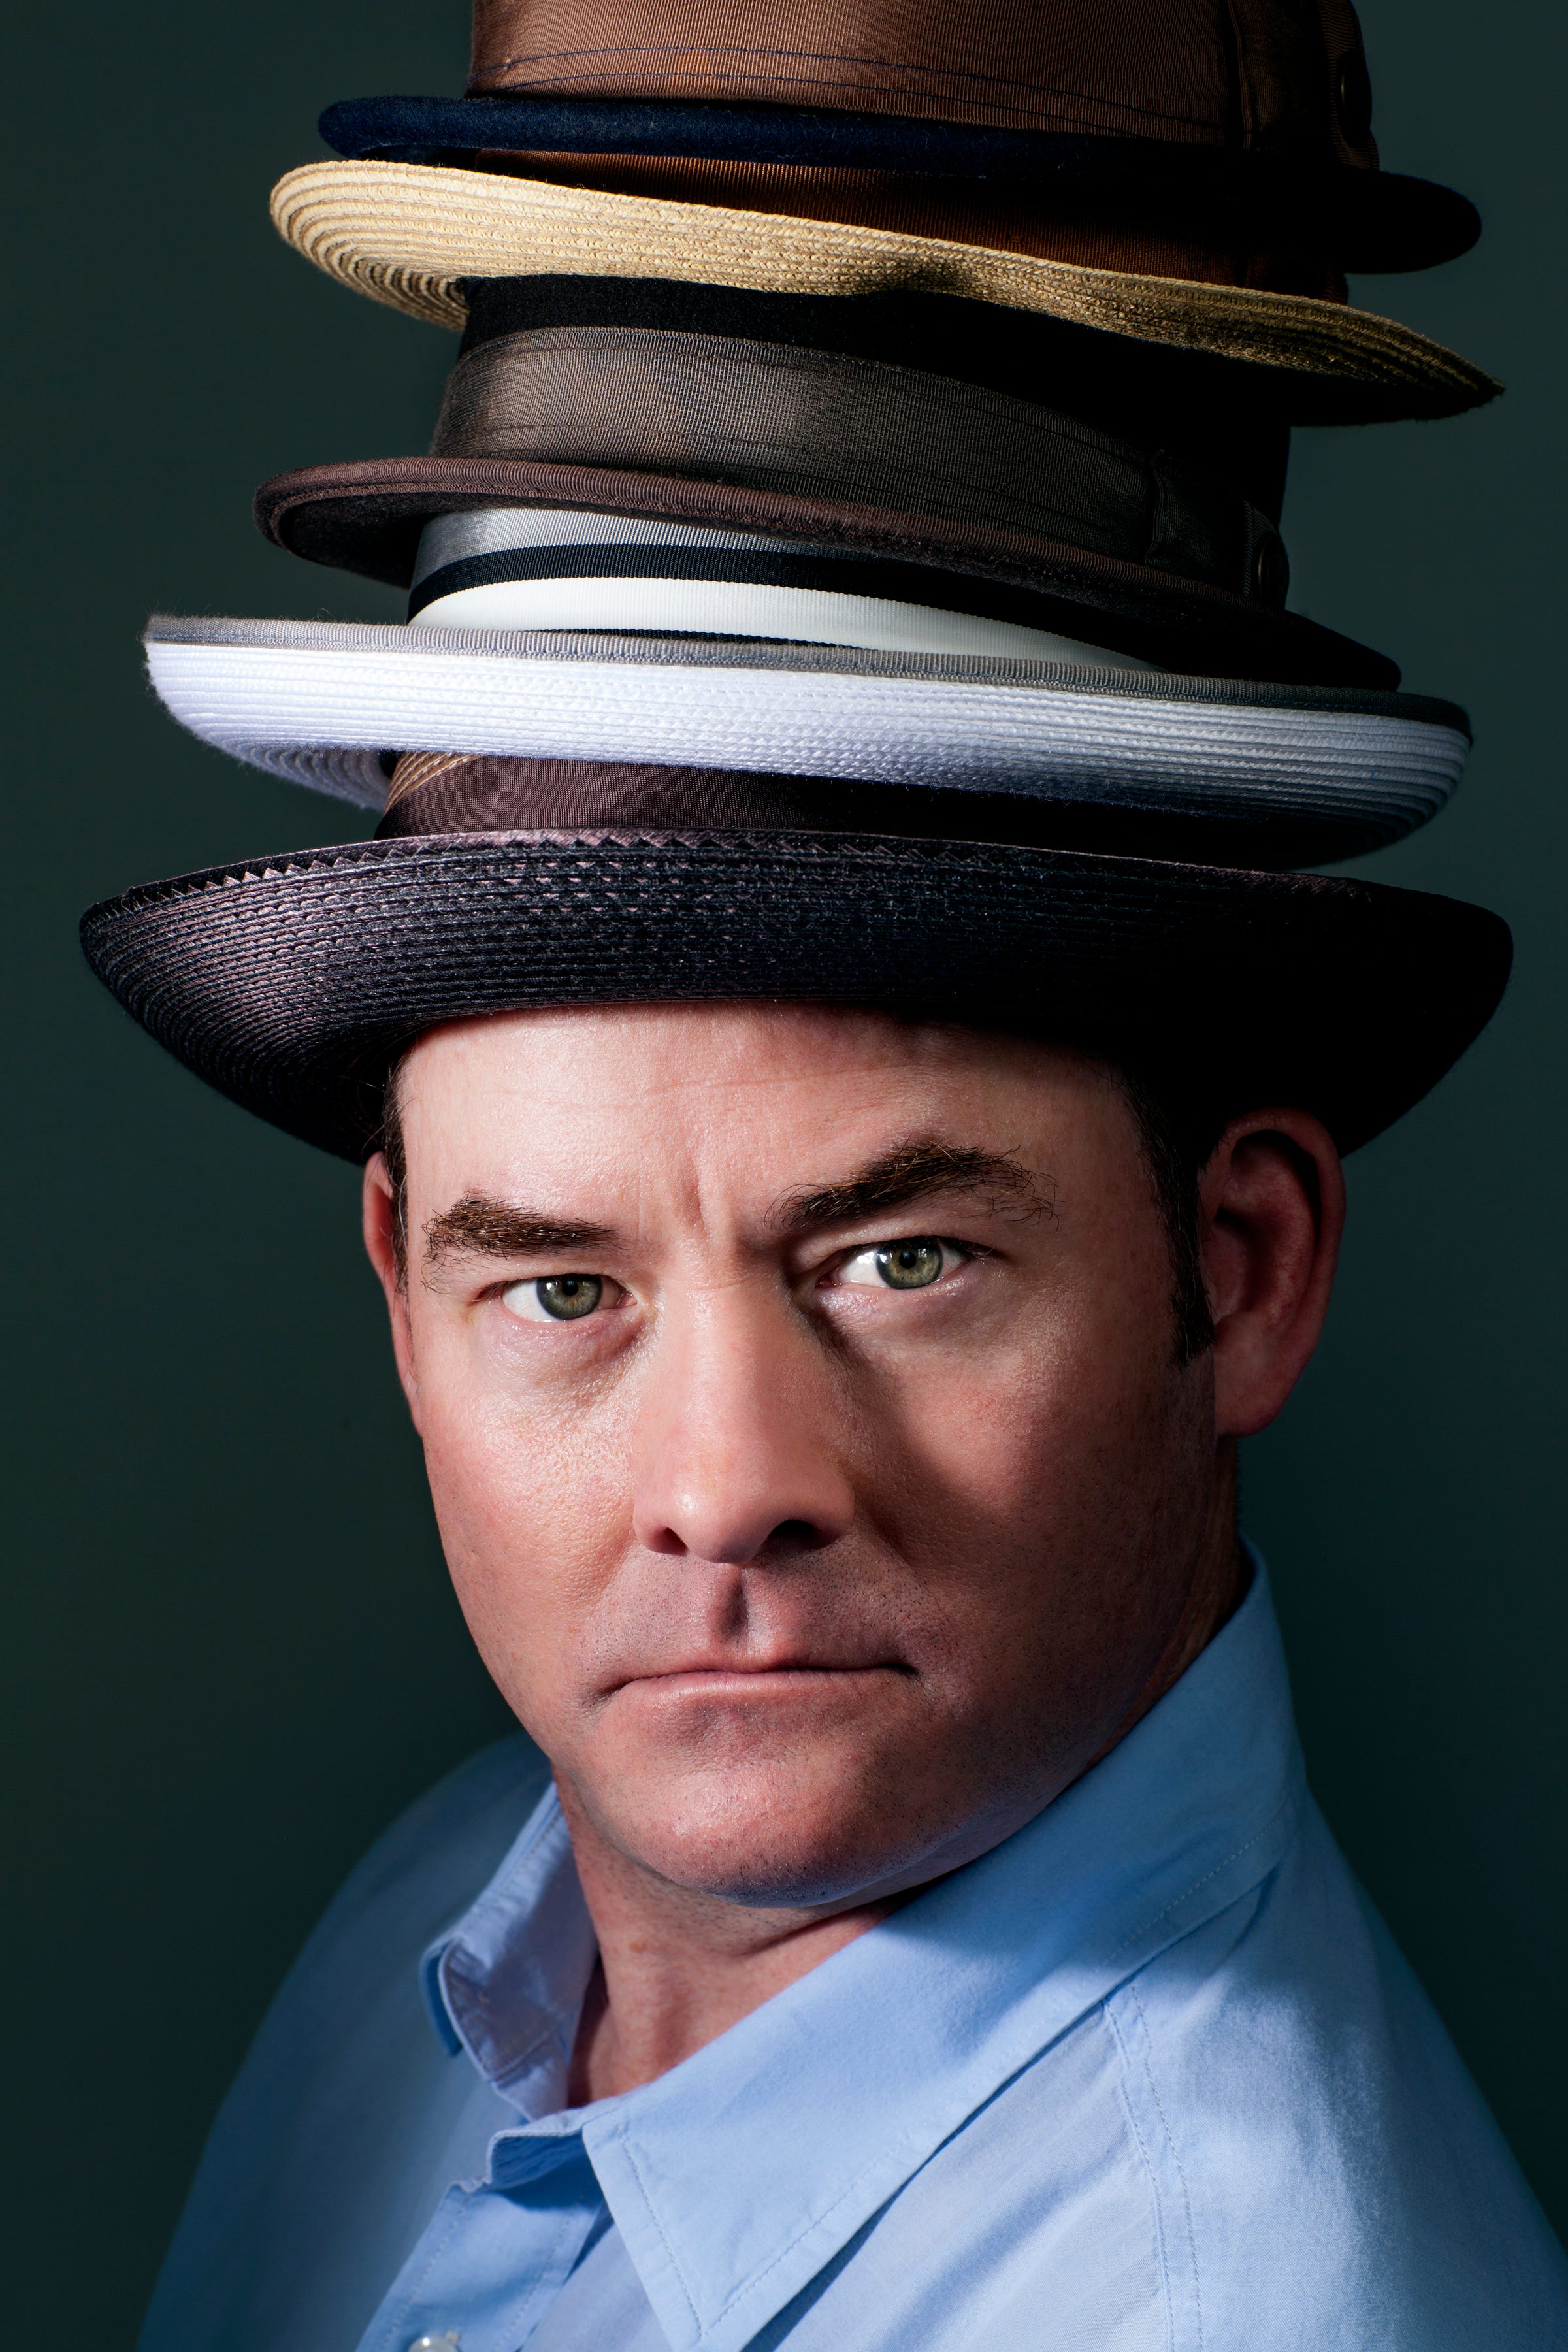 David Koechner brings 'The Office' Trivia with Todd Packer to Des Moines